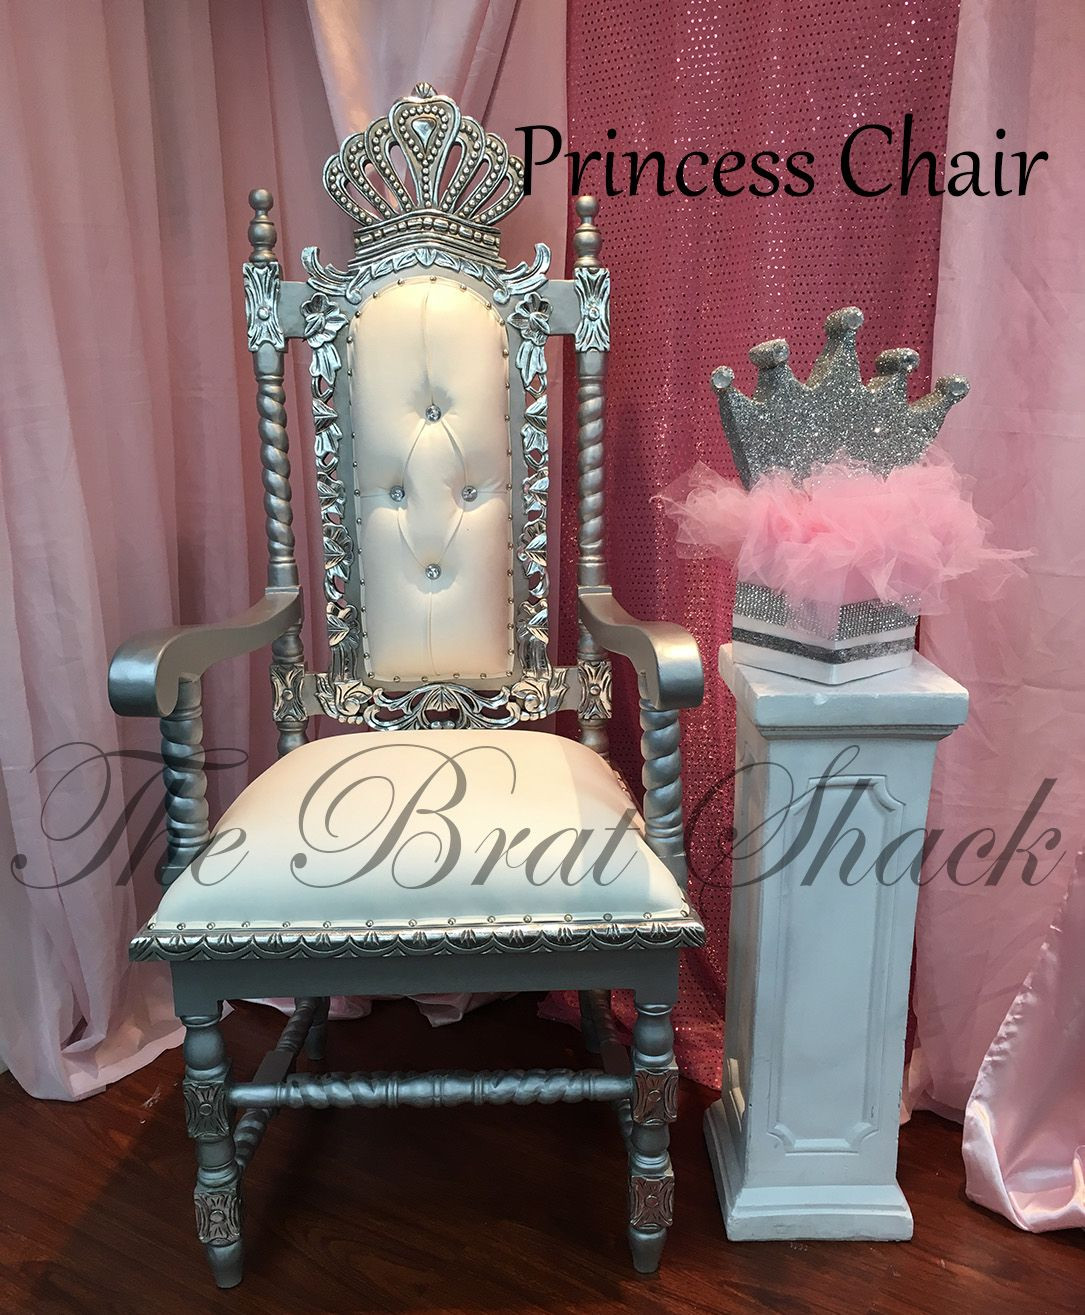 Party Room Rentals For Baby Shower
 Elegant Princess Chair Rental for Birthdays & Baby Showers